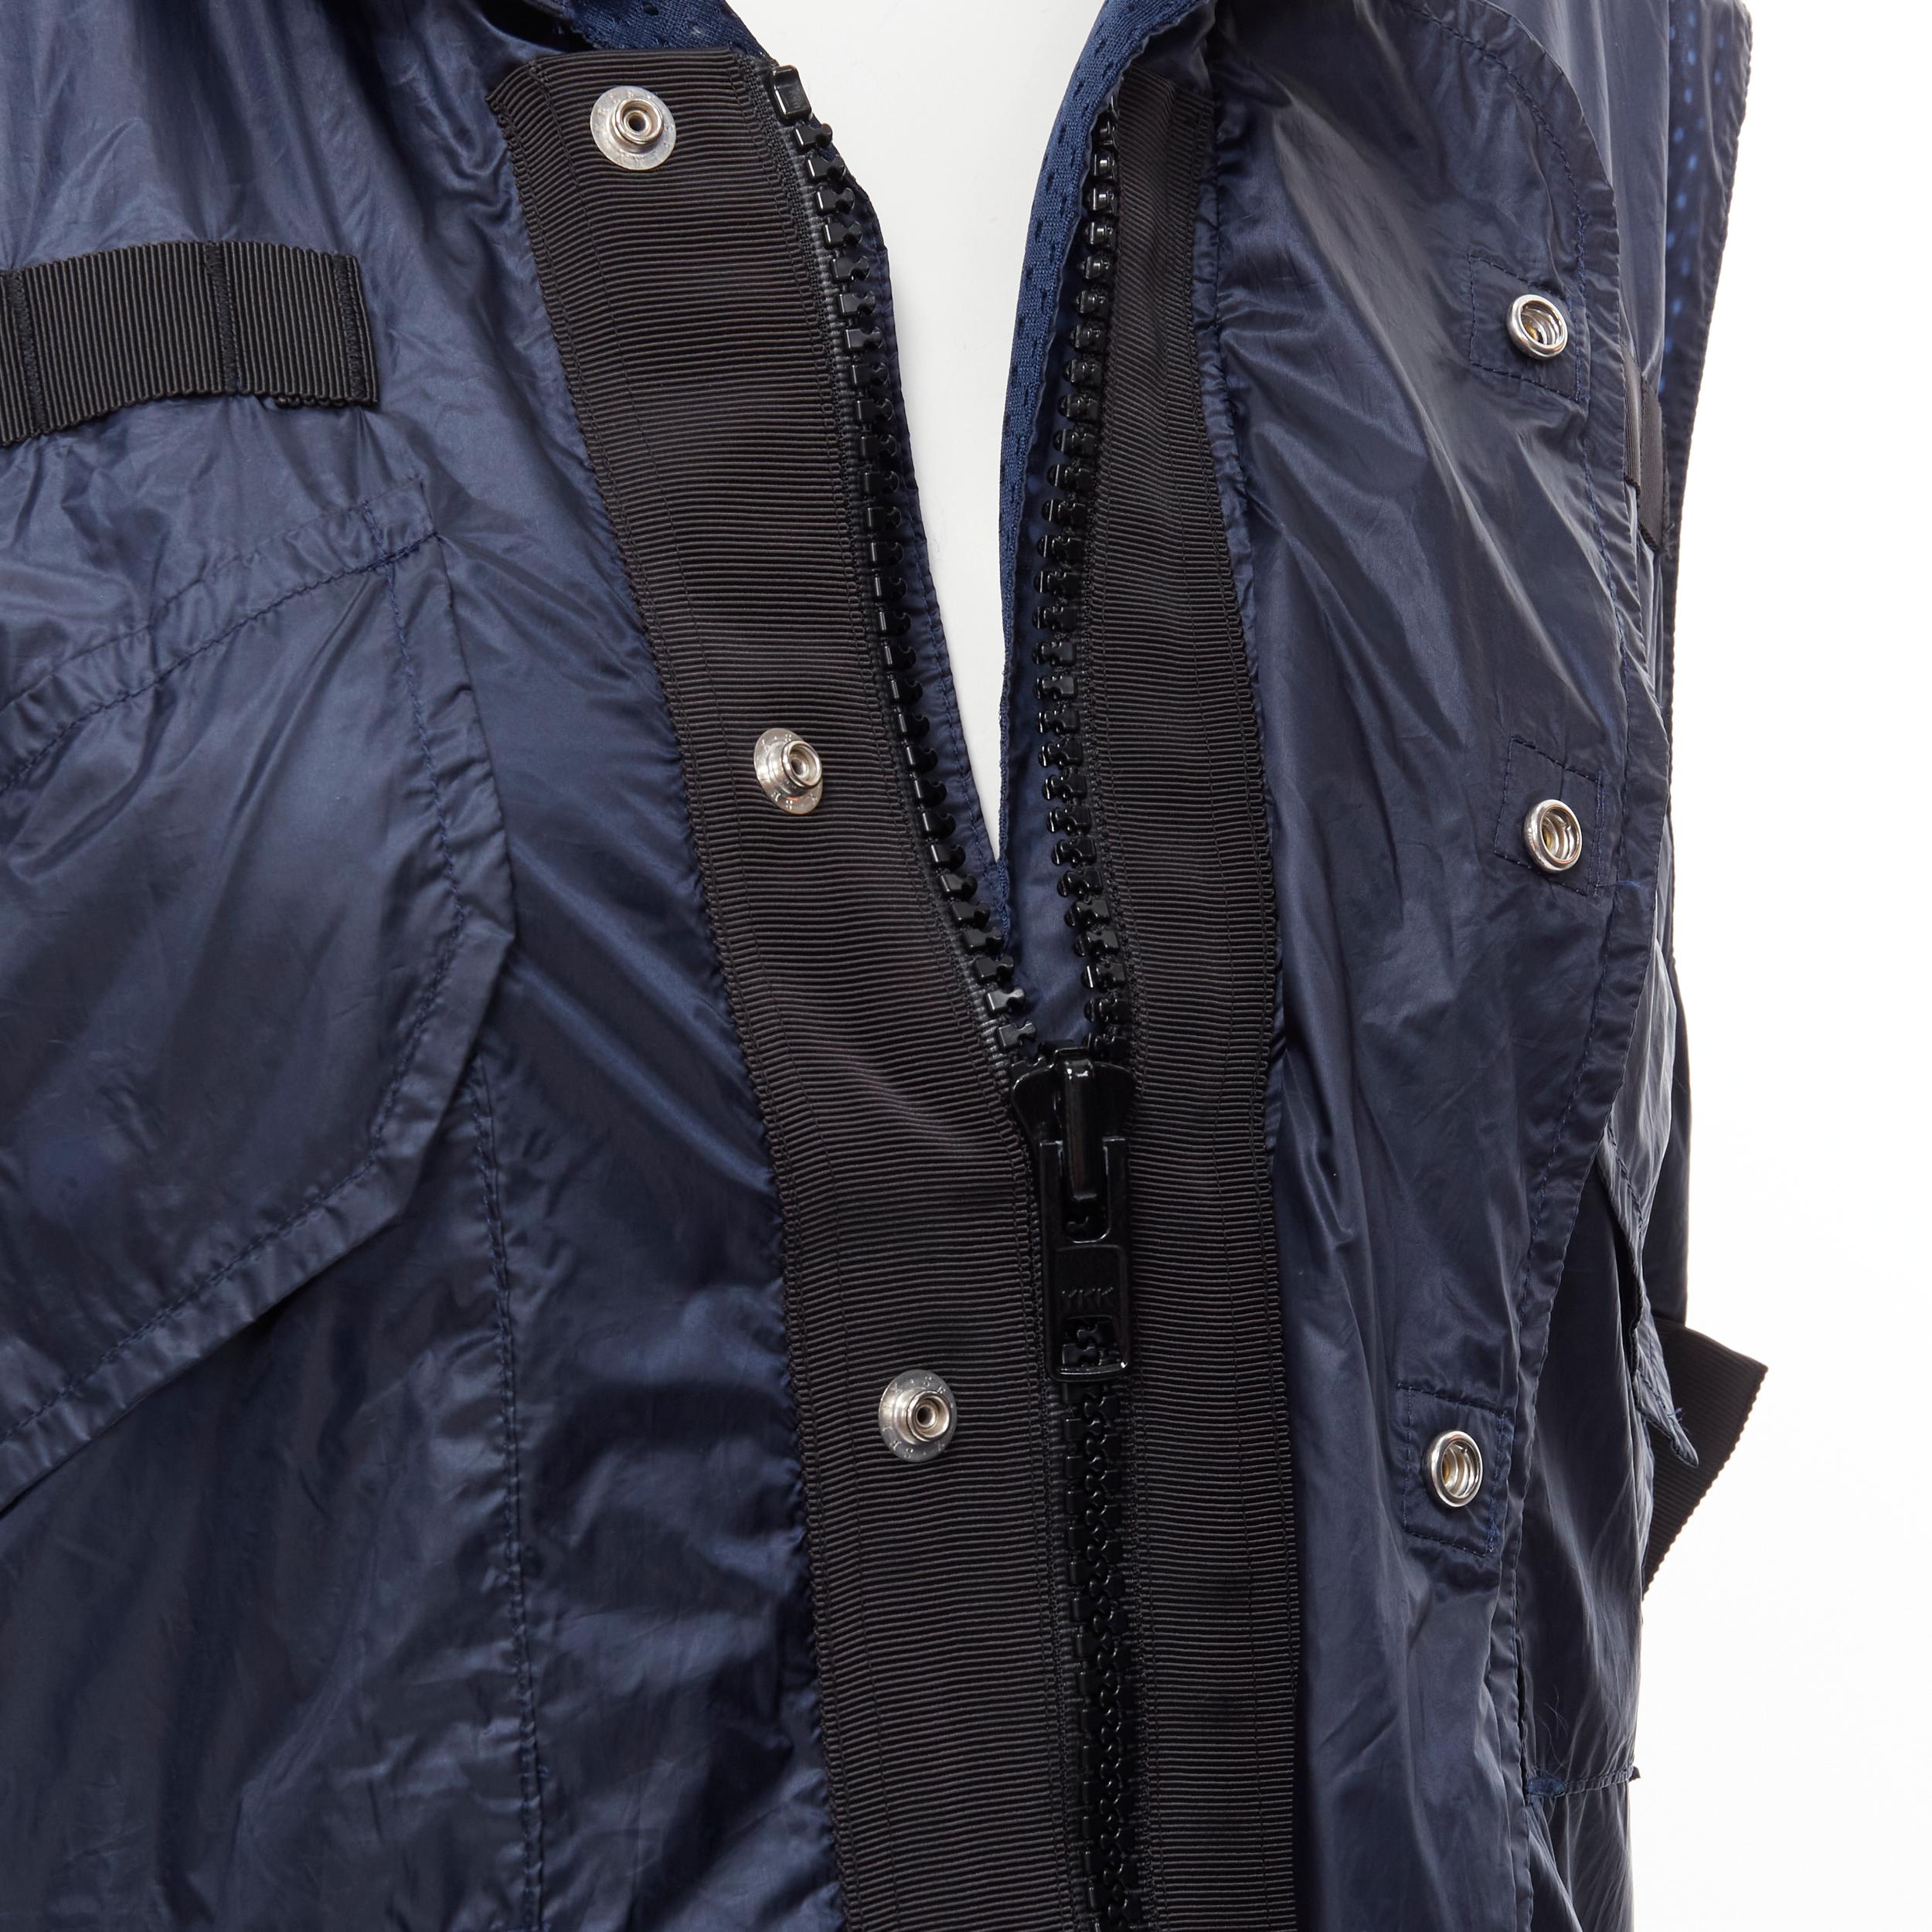 SACAI 2015 navy blue light nylon technical pocket grosgrain zip vest S 
Reference: KNCN/A00016 
Brand: Sacai 
Designer: Chitose Abe 
Collection: 201 
Material: Polyester 
Color: Navy 
Pattern: Solid 
Closure: Zip 
Made in: Japan 

CONDITION: